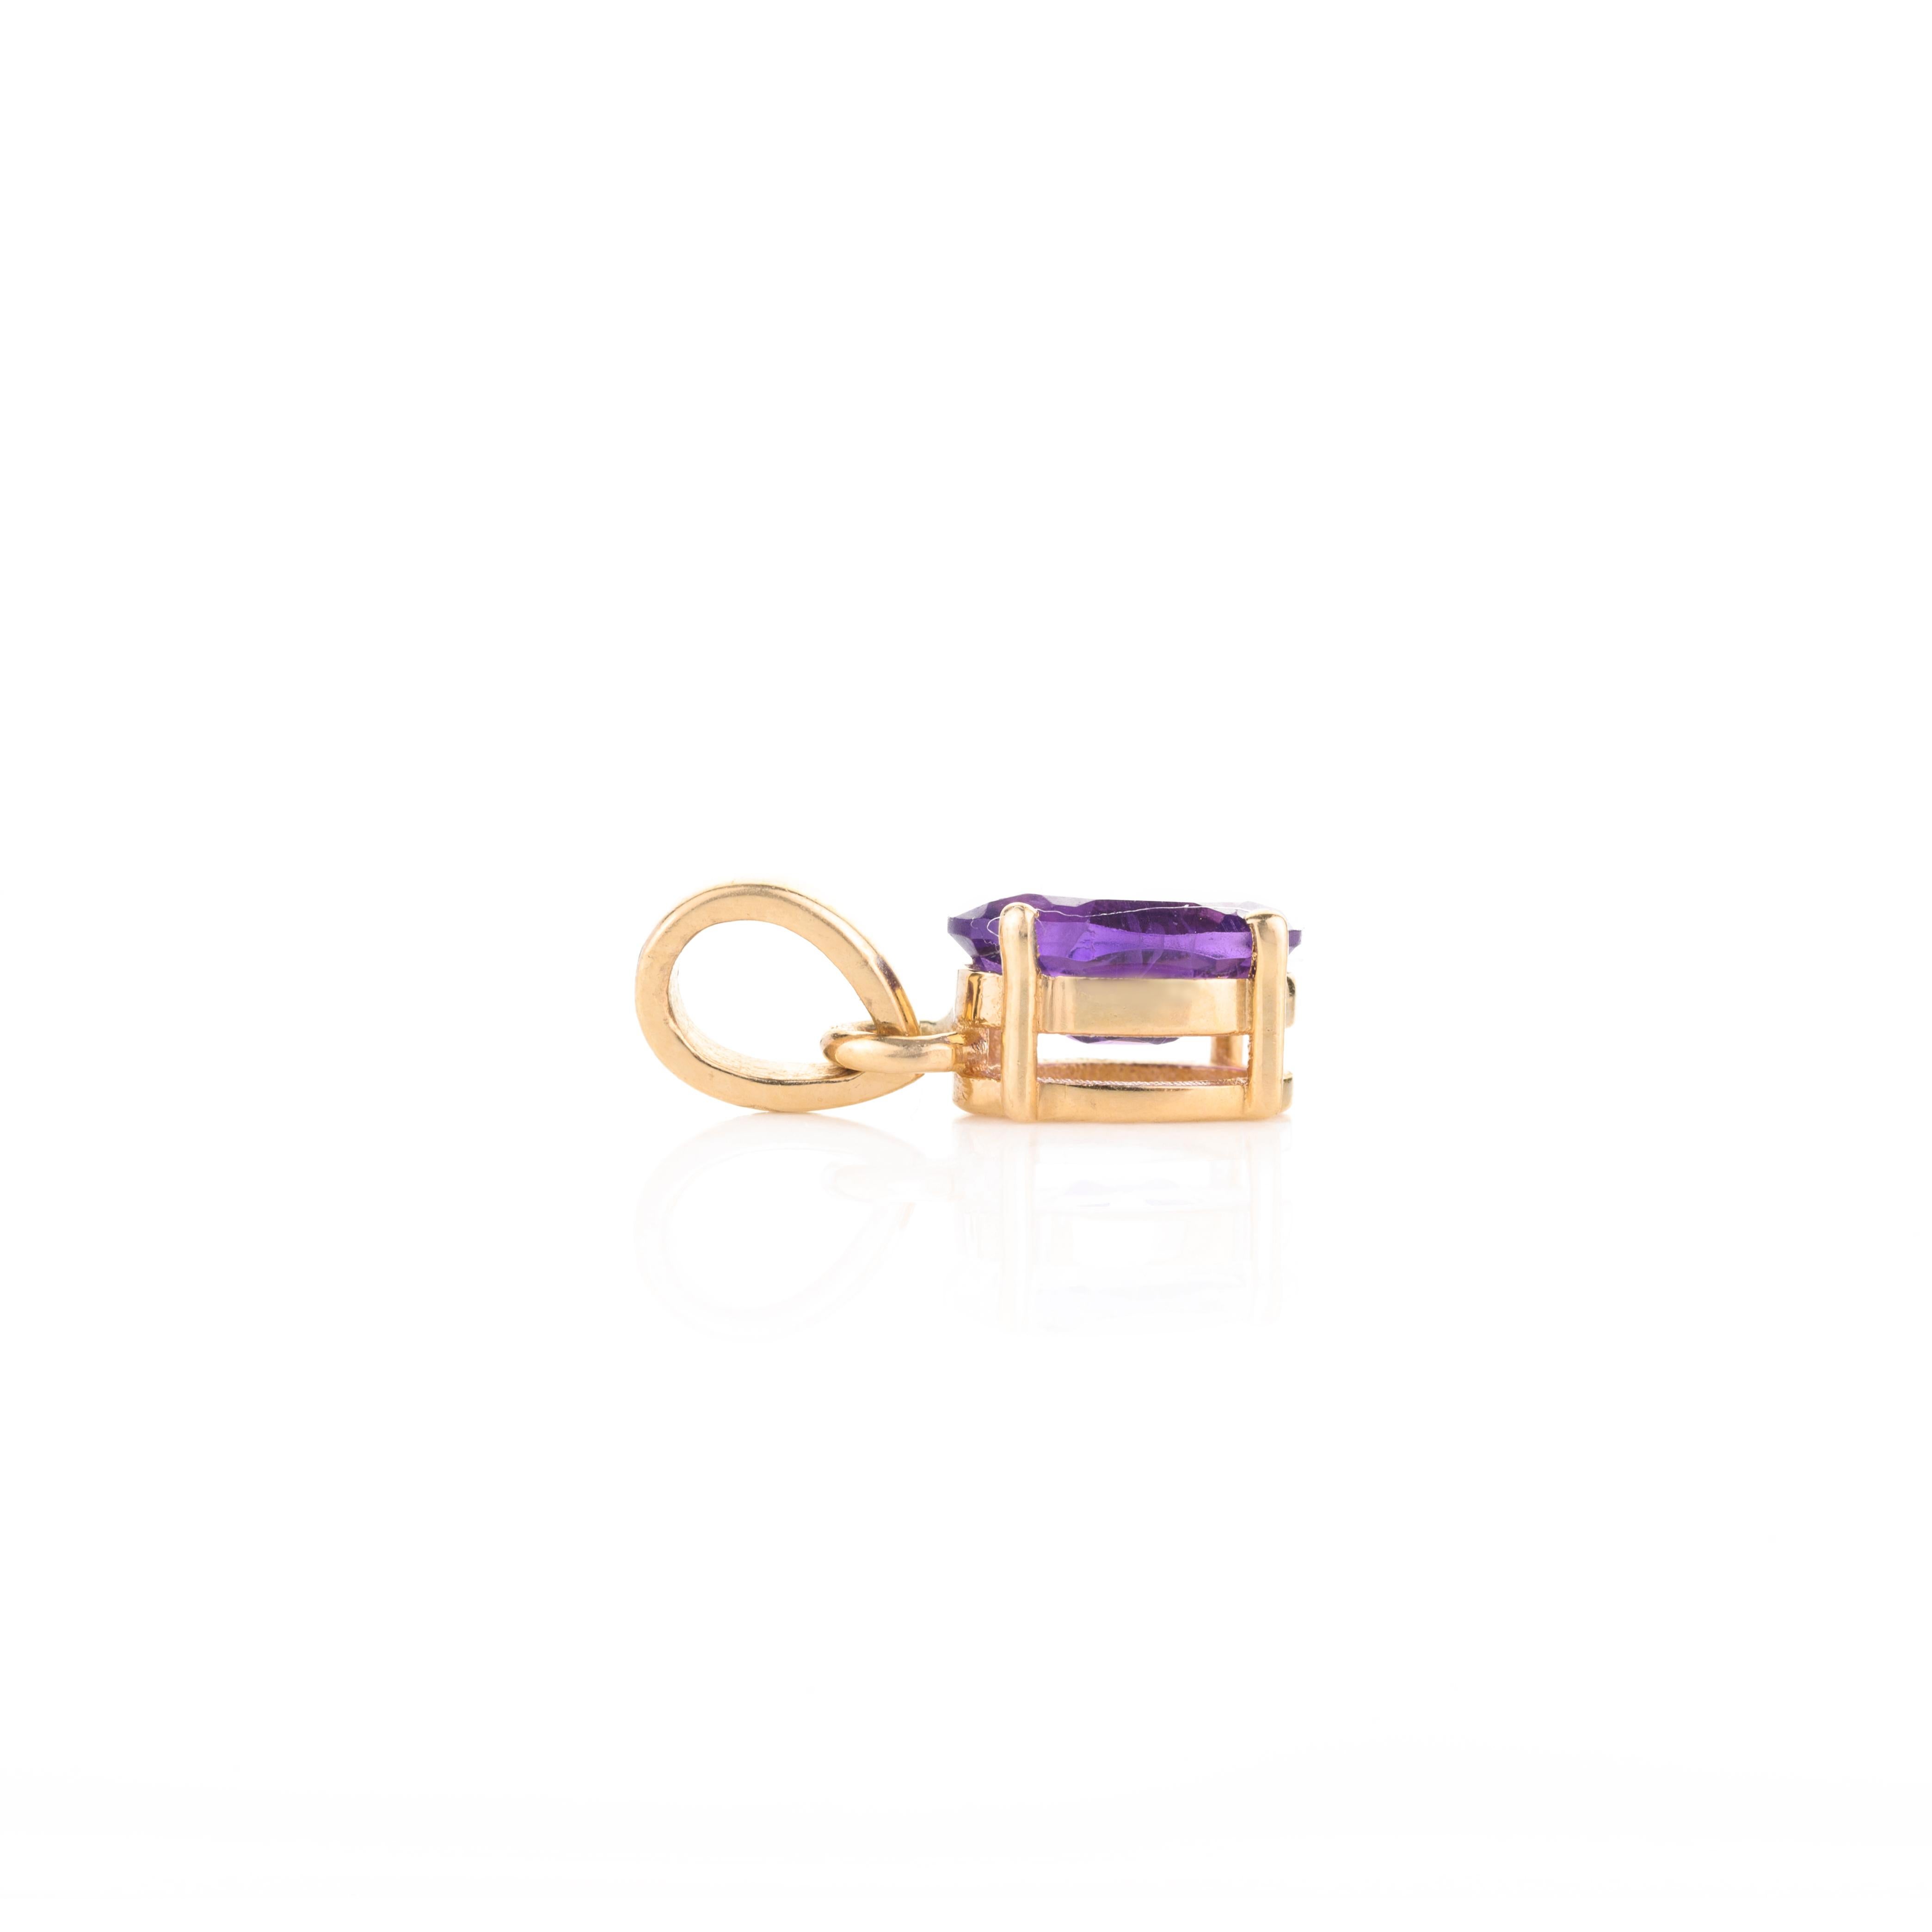 For Sale:  18k Solid Yellow Gold Amethyst Ring, Pendant and Earring Jewelry Set Gift 4